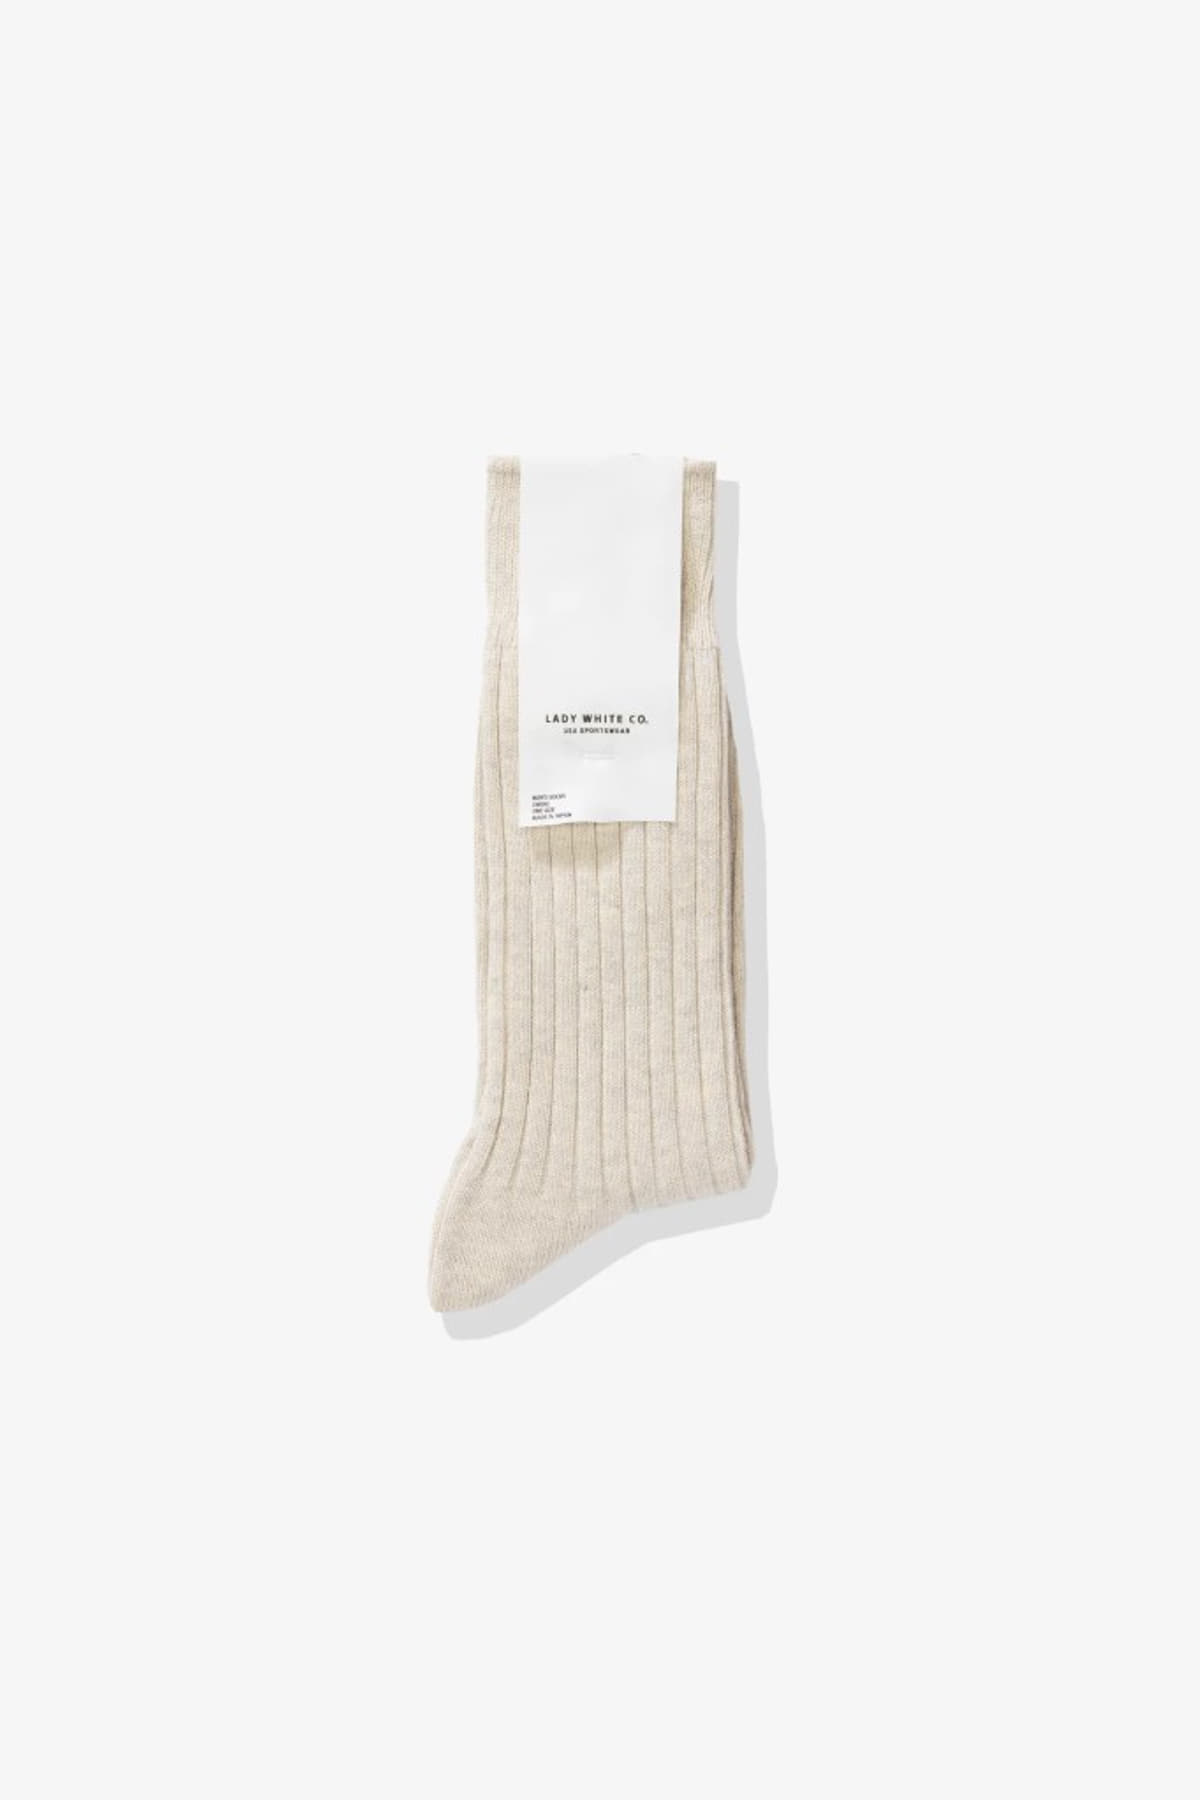 [LADY WHITE CO.] LWC Socks - Natural